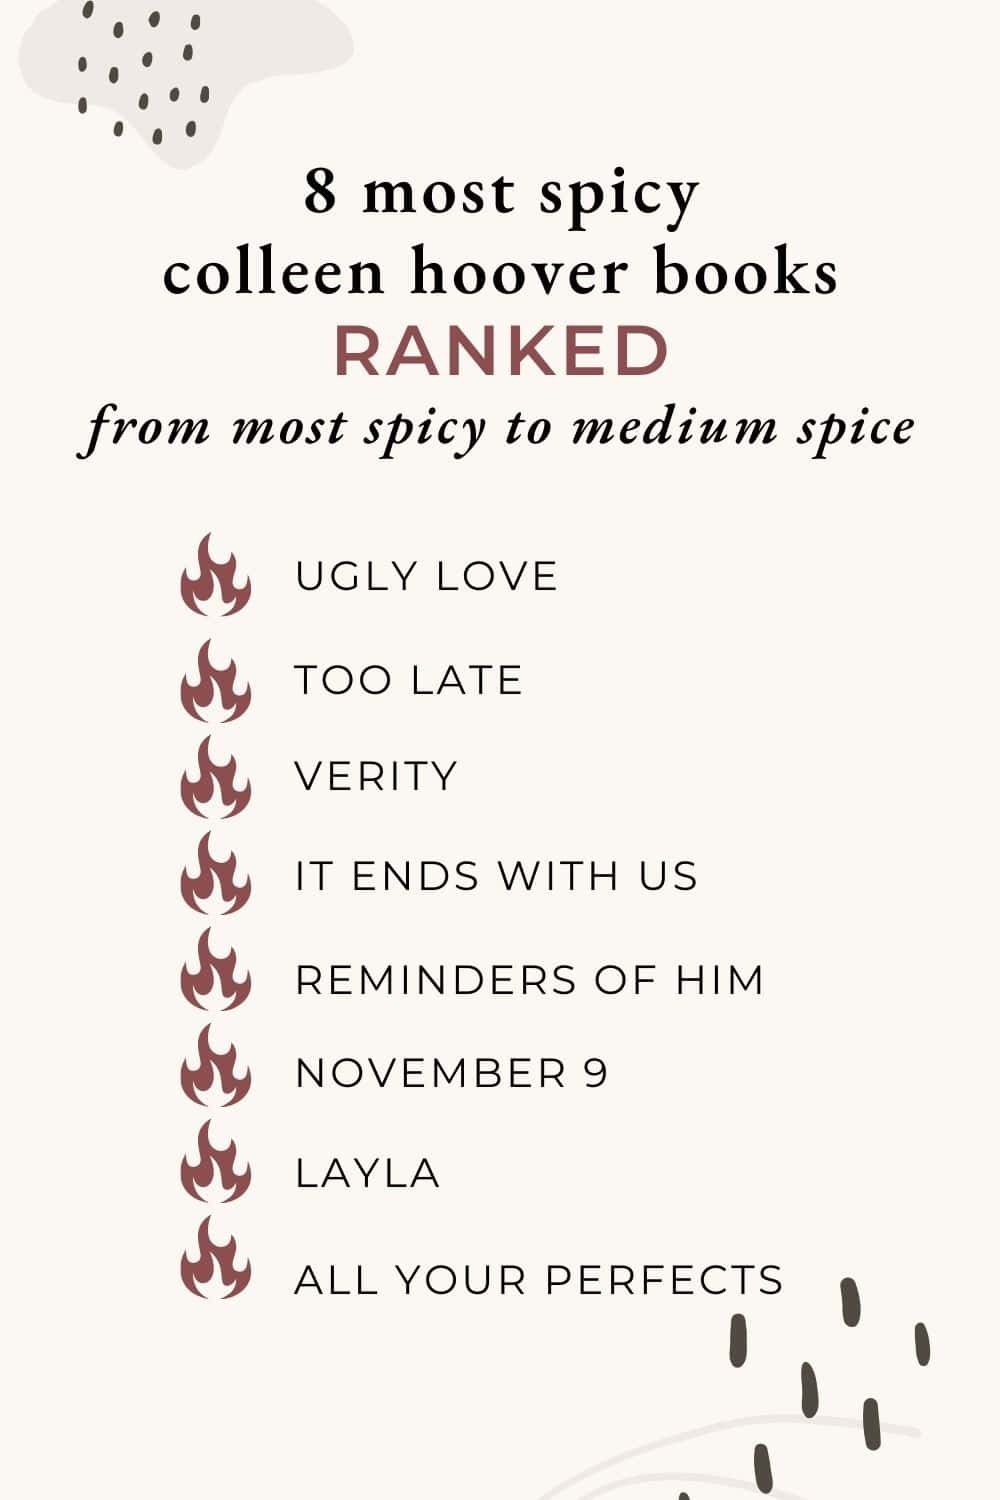 8 most spicy colleen hoover books ranked from most spicy to medium spice.